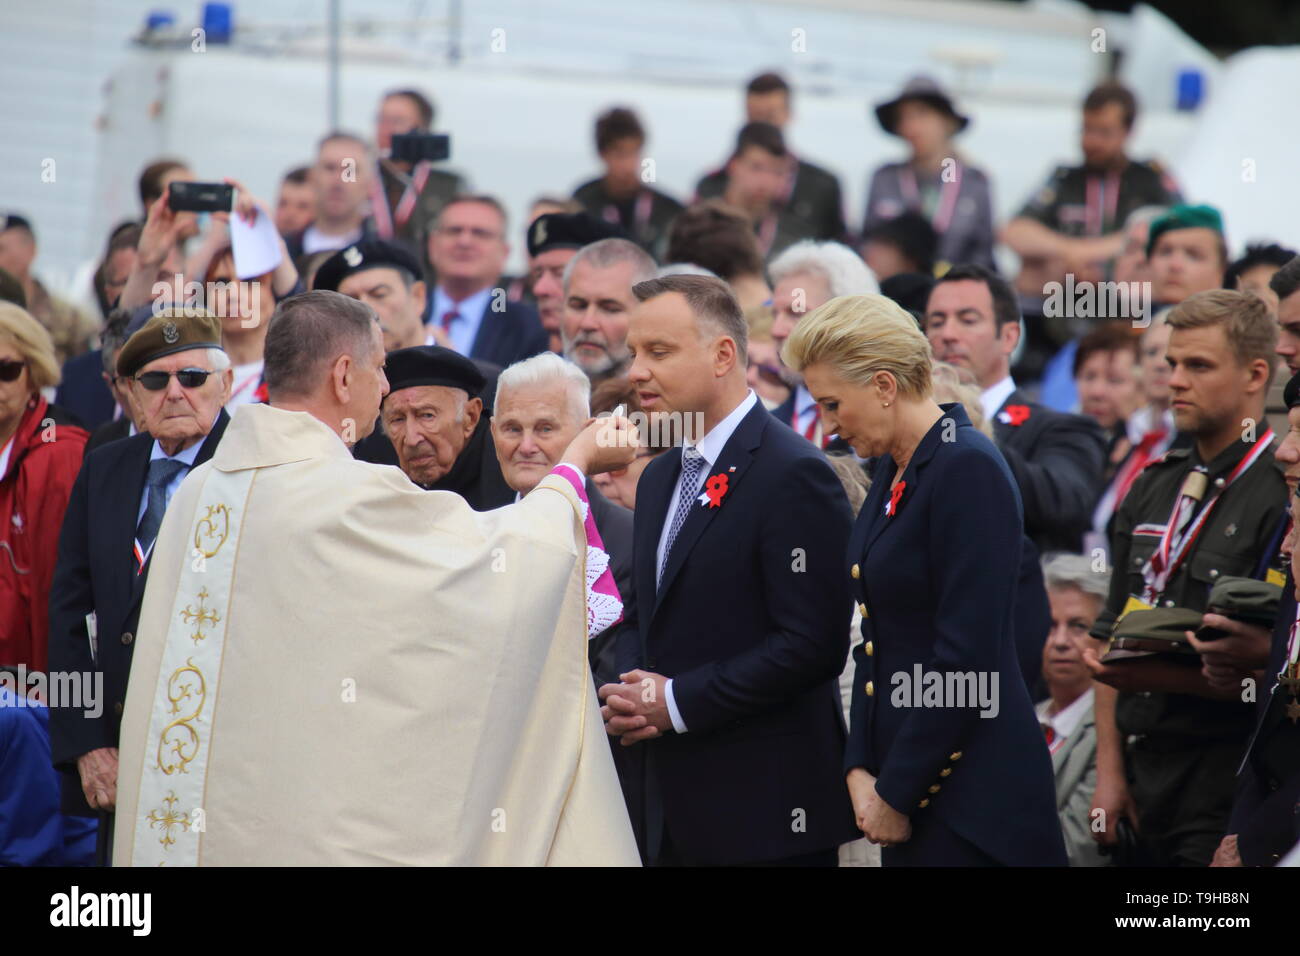 Cassino, Italy - May 18, 2019: Polish President Andrzej Duda and his wife participate in the cerminia for the 75th anniversary of the Battle of Montecassino in the Polish military cemetery Stock Photo